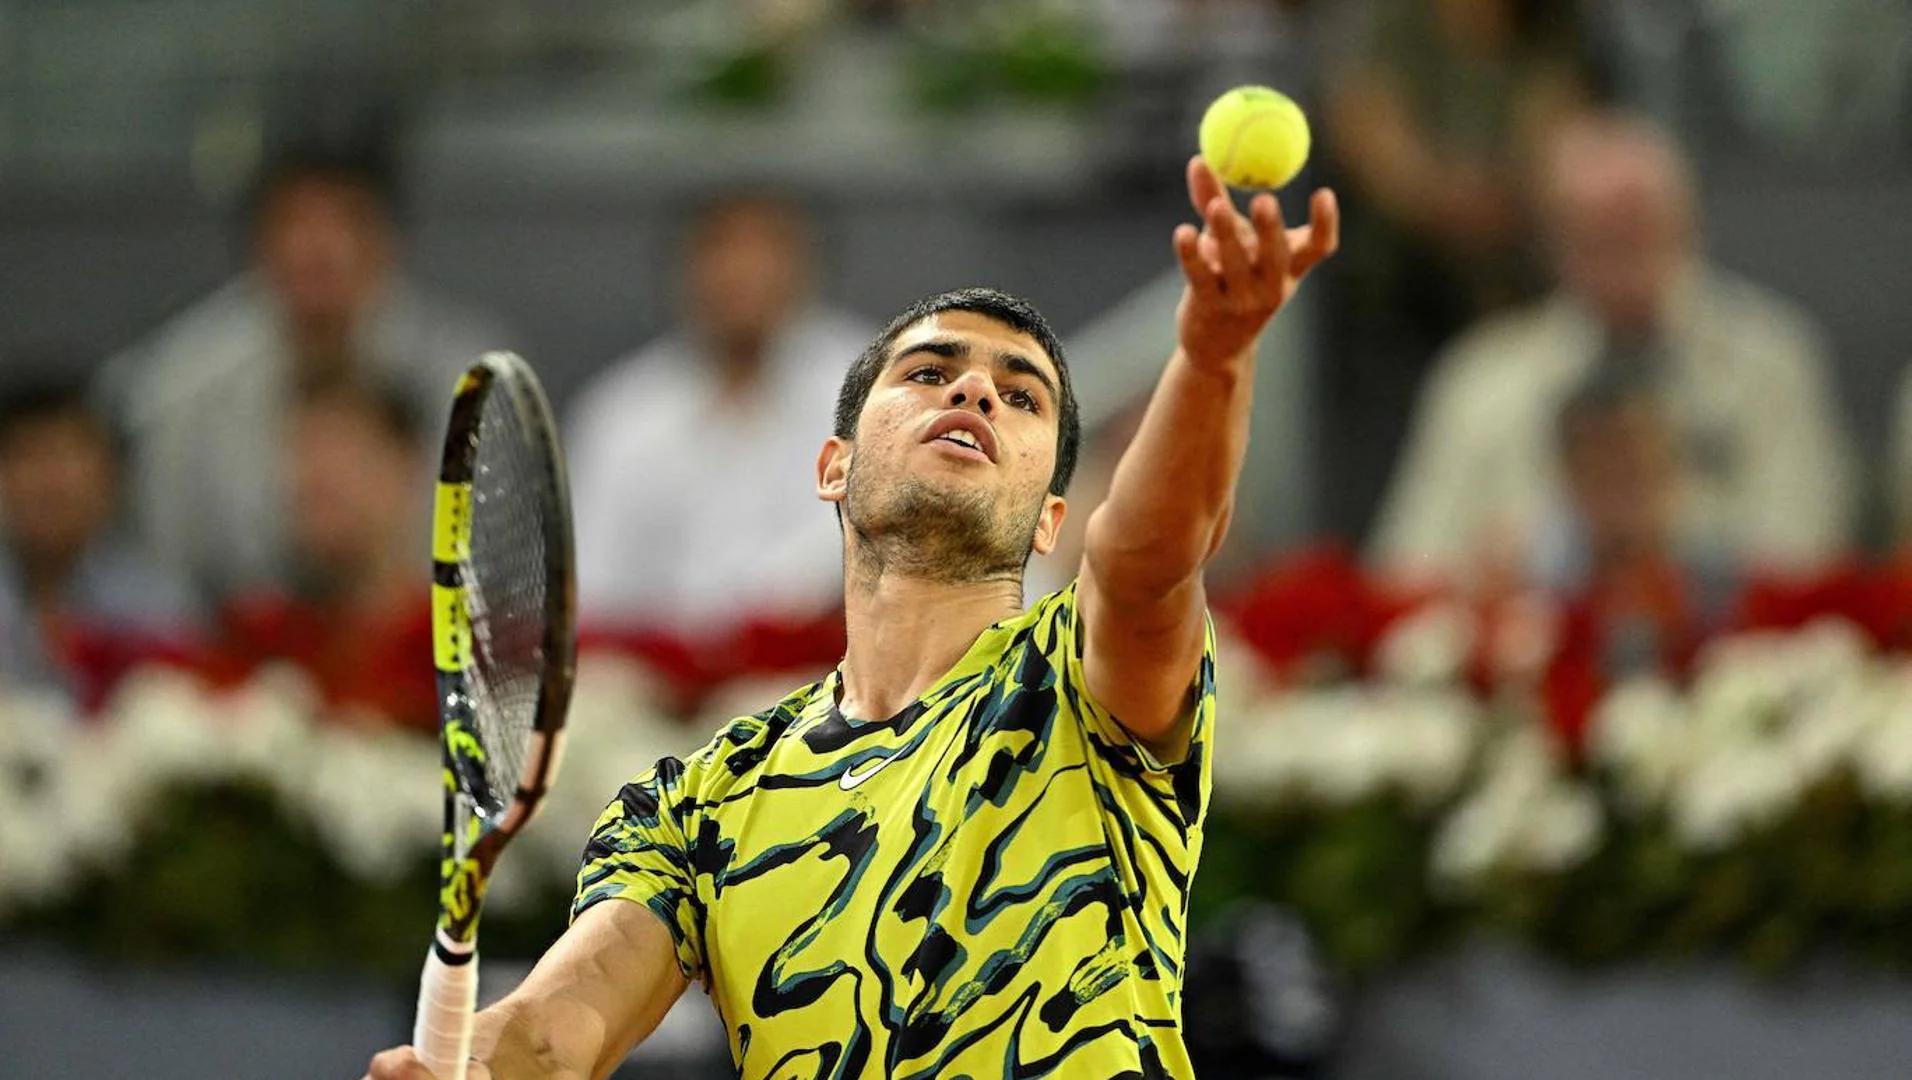 Schedule and where to watch Carlos Alcaraz's match against Zverev at